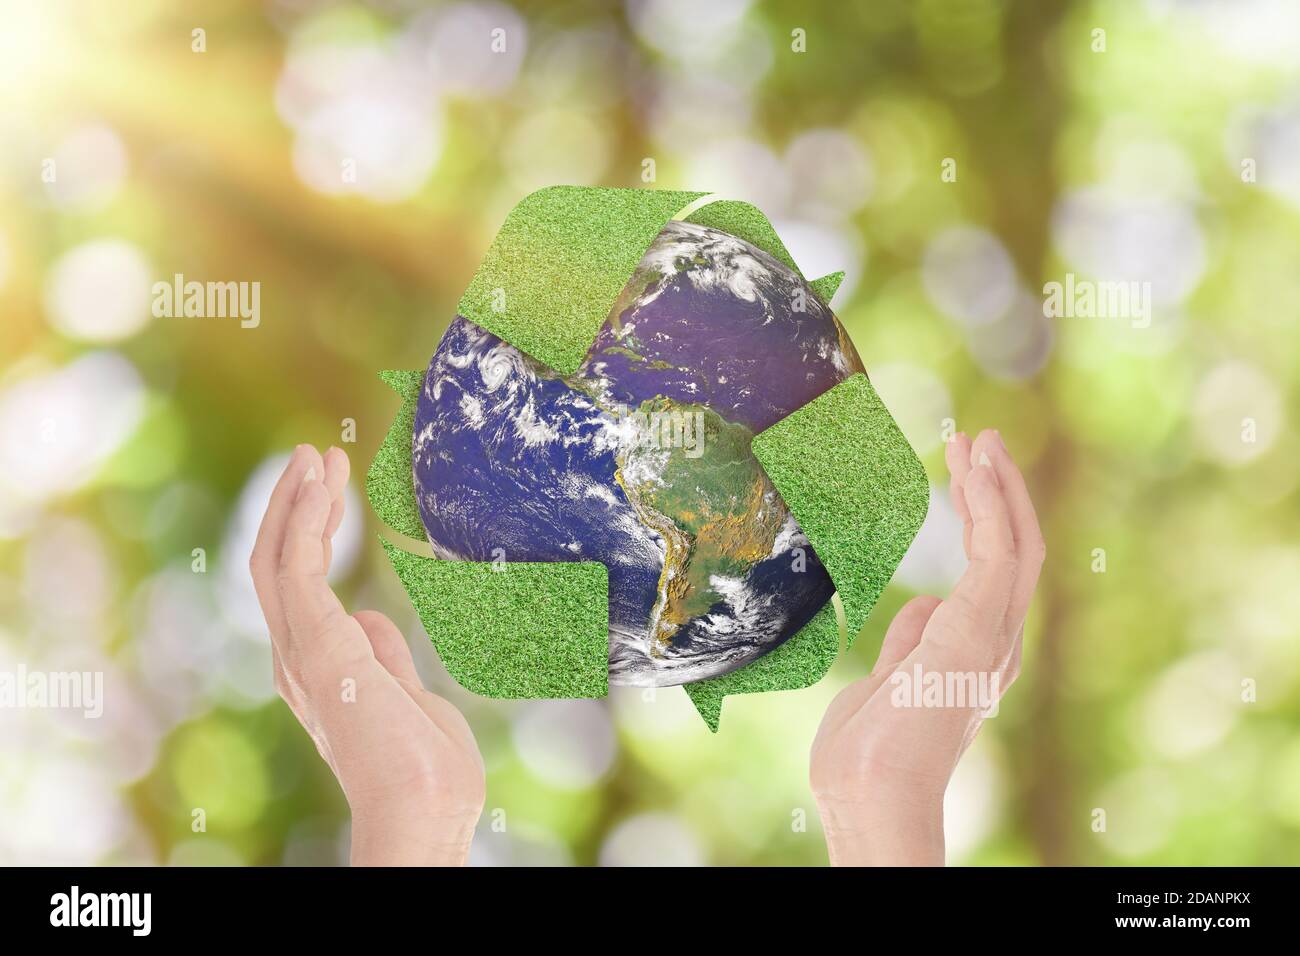 Green grass recycle symbol and Earth in hands over green nature background. Environment concept. Elements of this image furnished by NASA Stock Photo